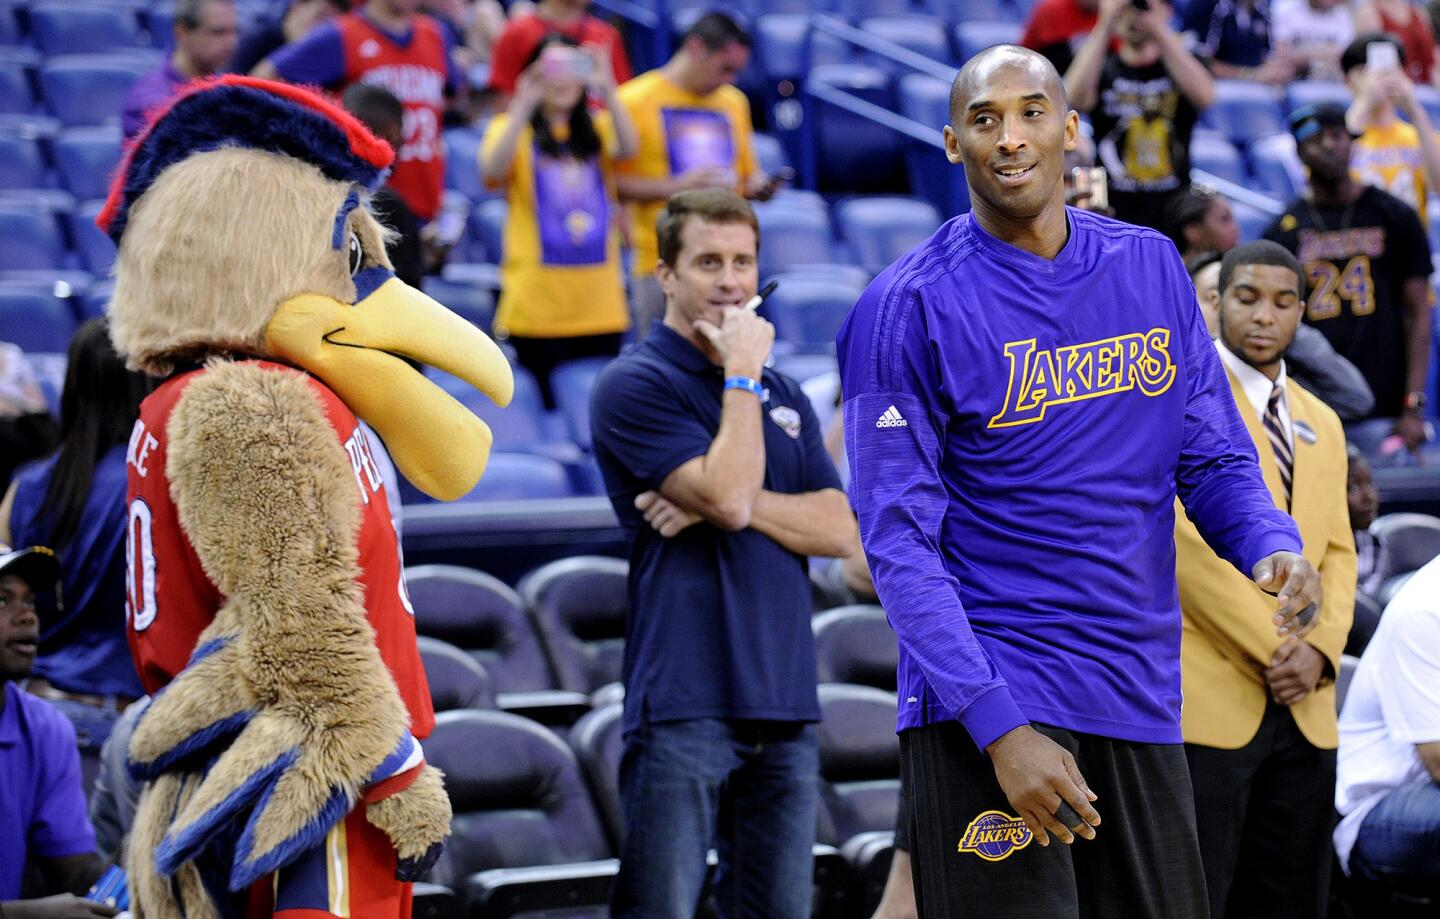 The New Orleans mascot pays a visit toKobe Bryant as he warms up for the game against the Pelicans.